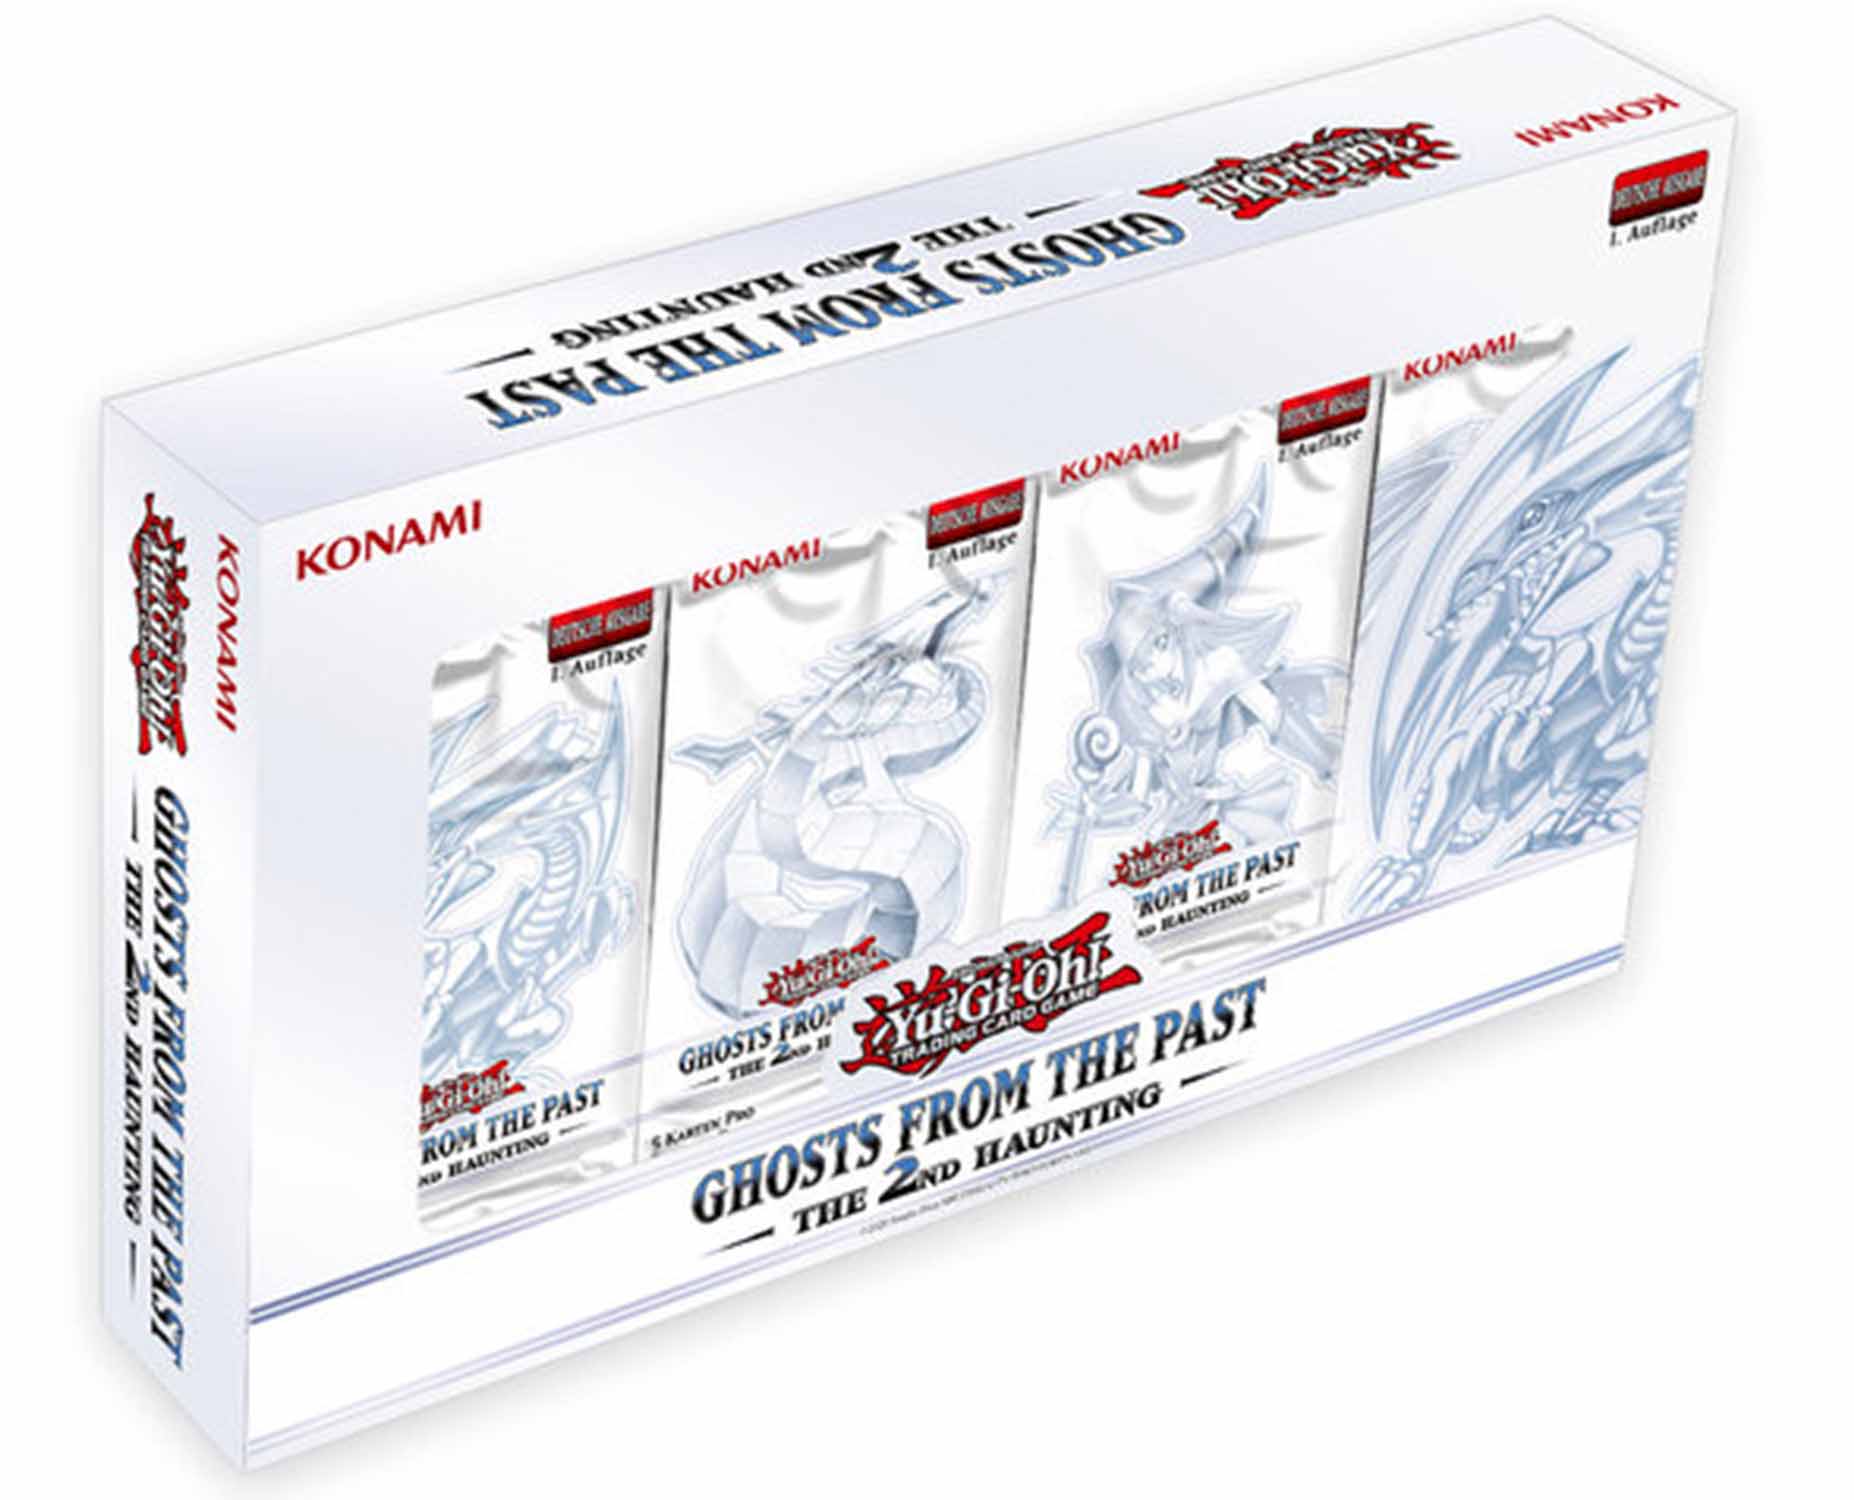 Ghosts From the Past - The 2nd Haunting Collection Box - Yu-Gi-Oh! - DE